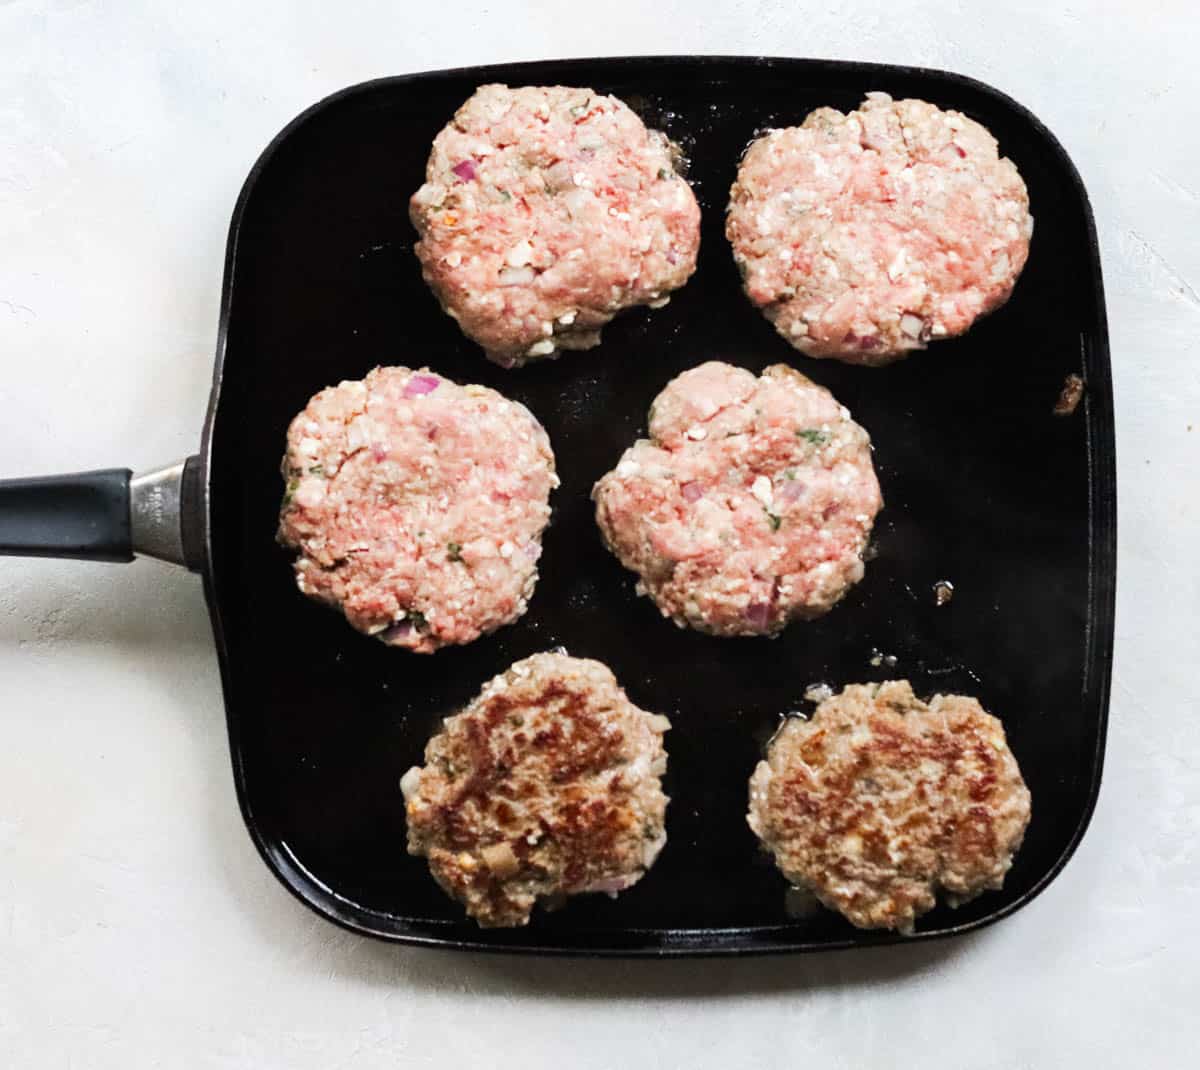 six lamb burgers cooking on a skillet.